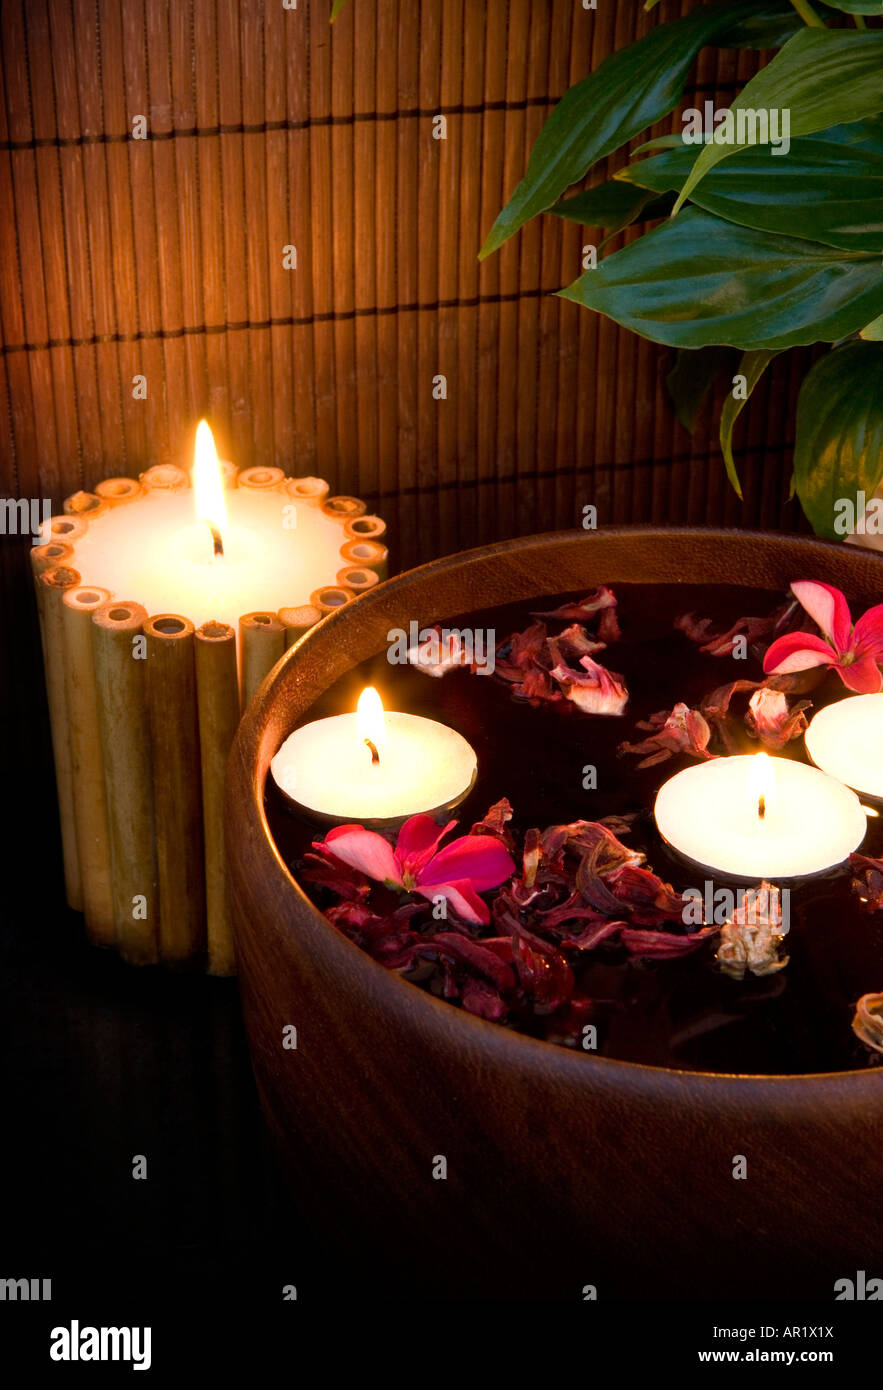 Spa setting with floating candles Stock Photo